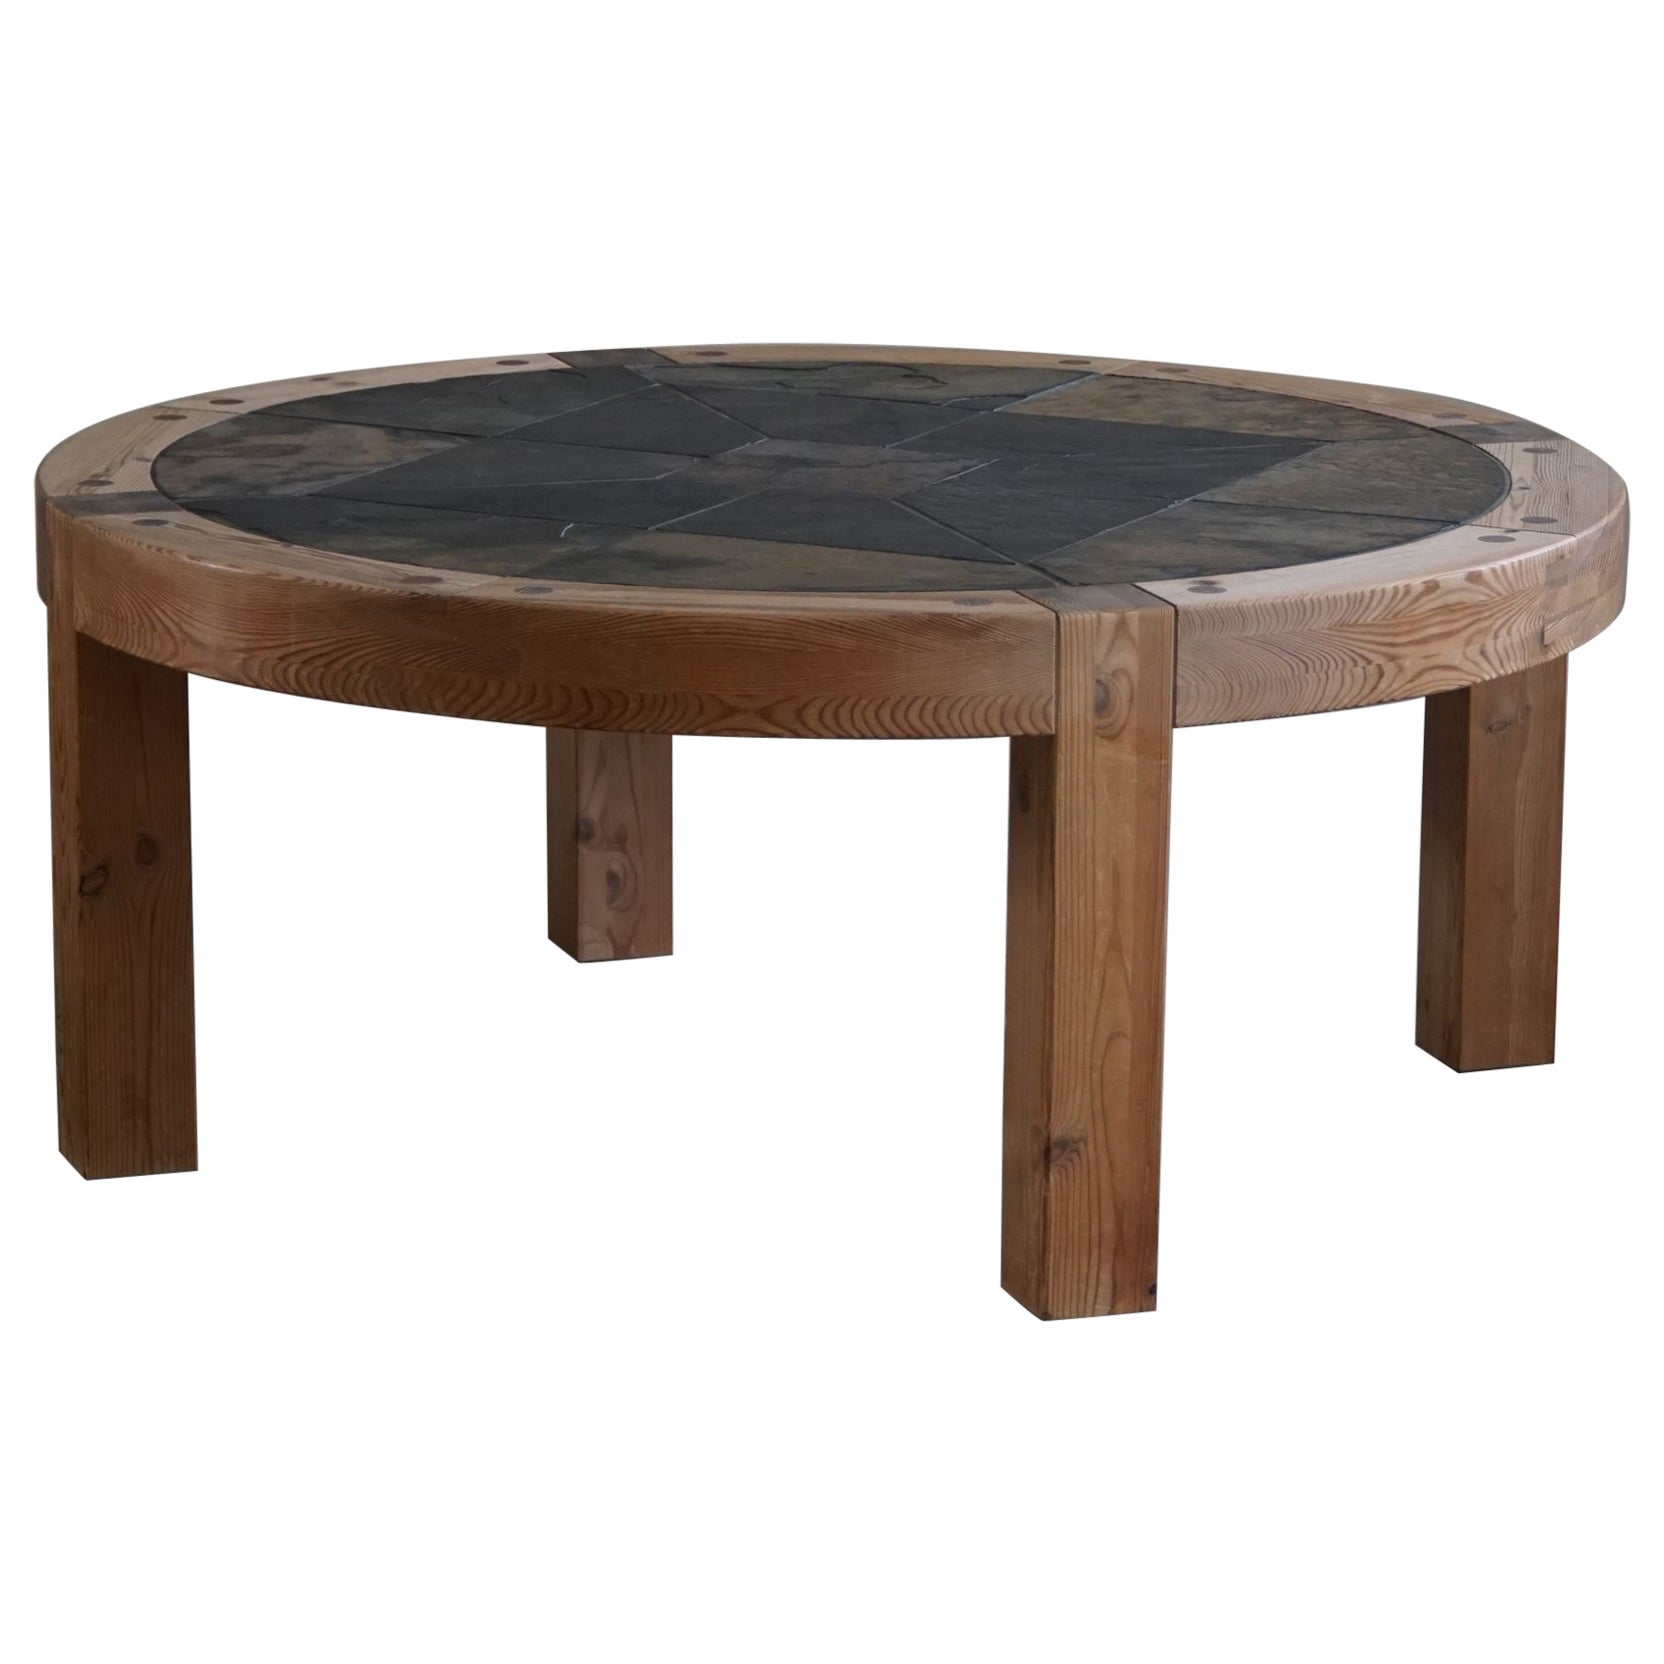 Large Round Coffee Table in Pine & Ceramic by Sallingboe, Danish Design, 1970s For Sale